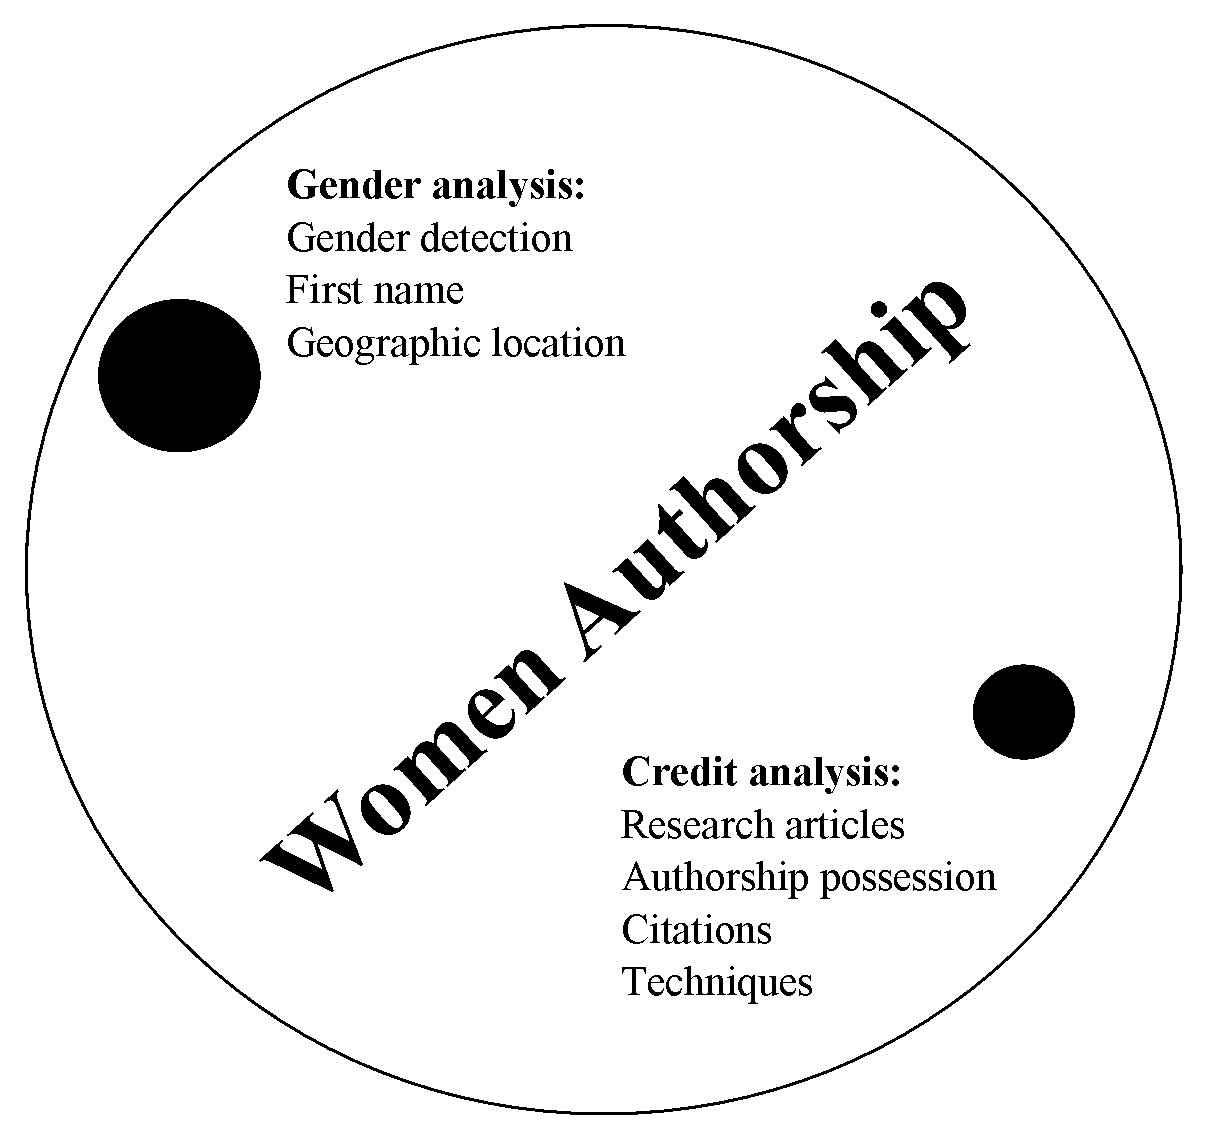 Data and Techniques Used for Analysis of Women Authorship in STEMM: A Review